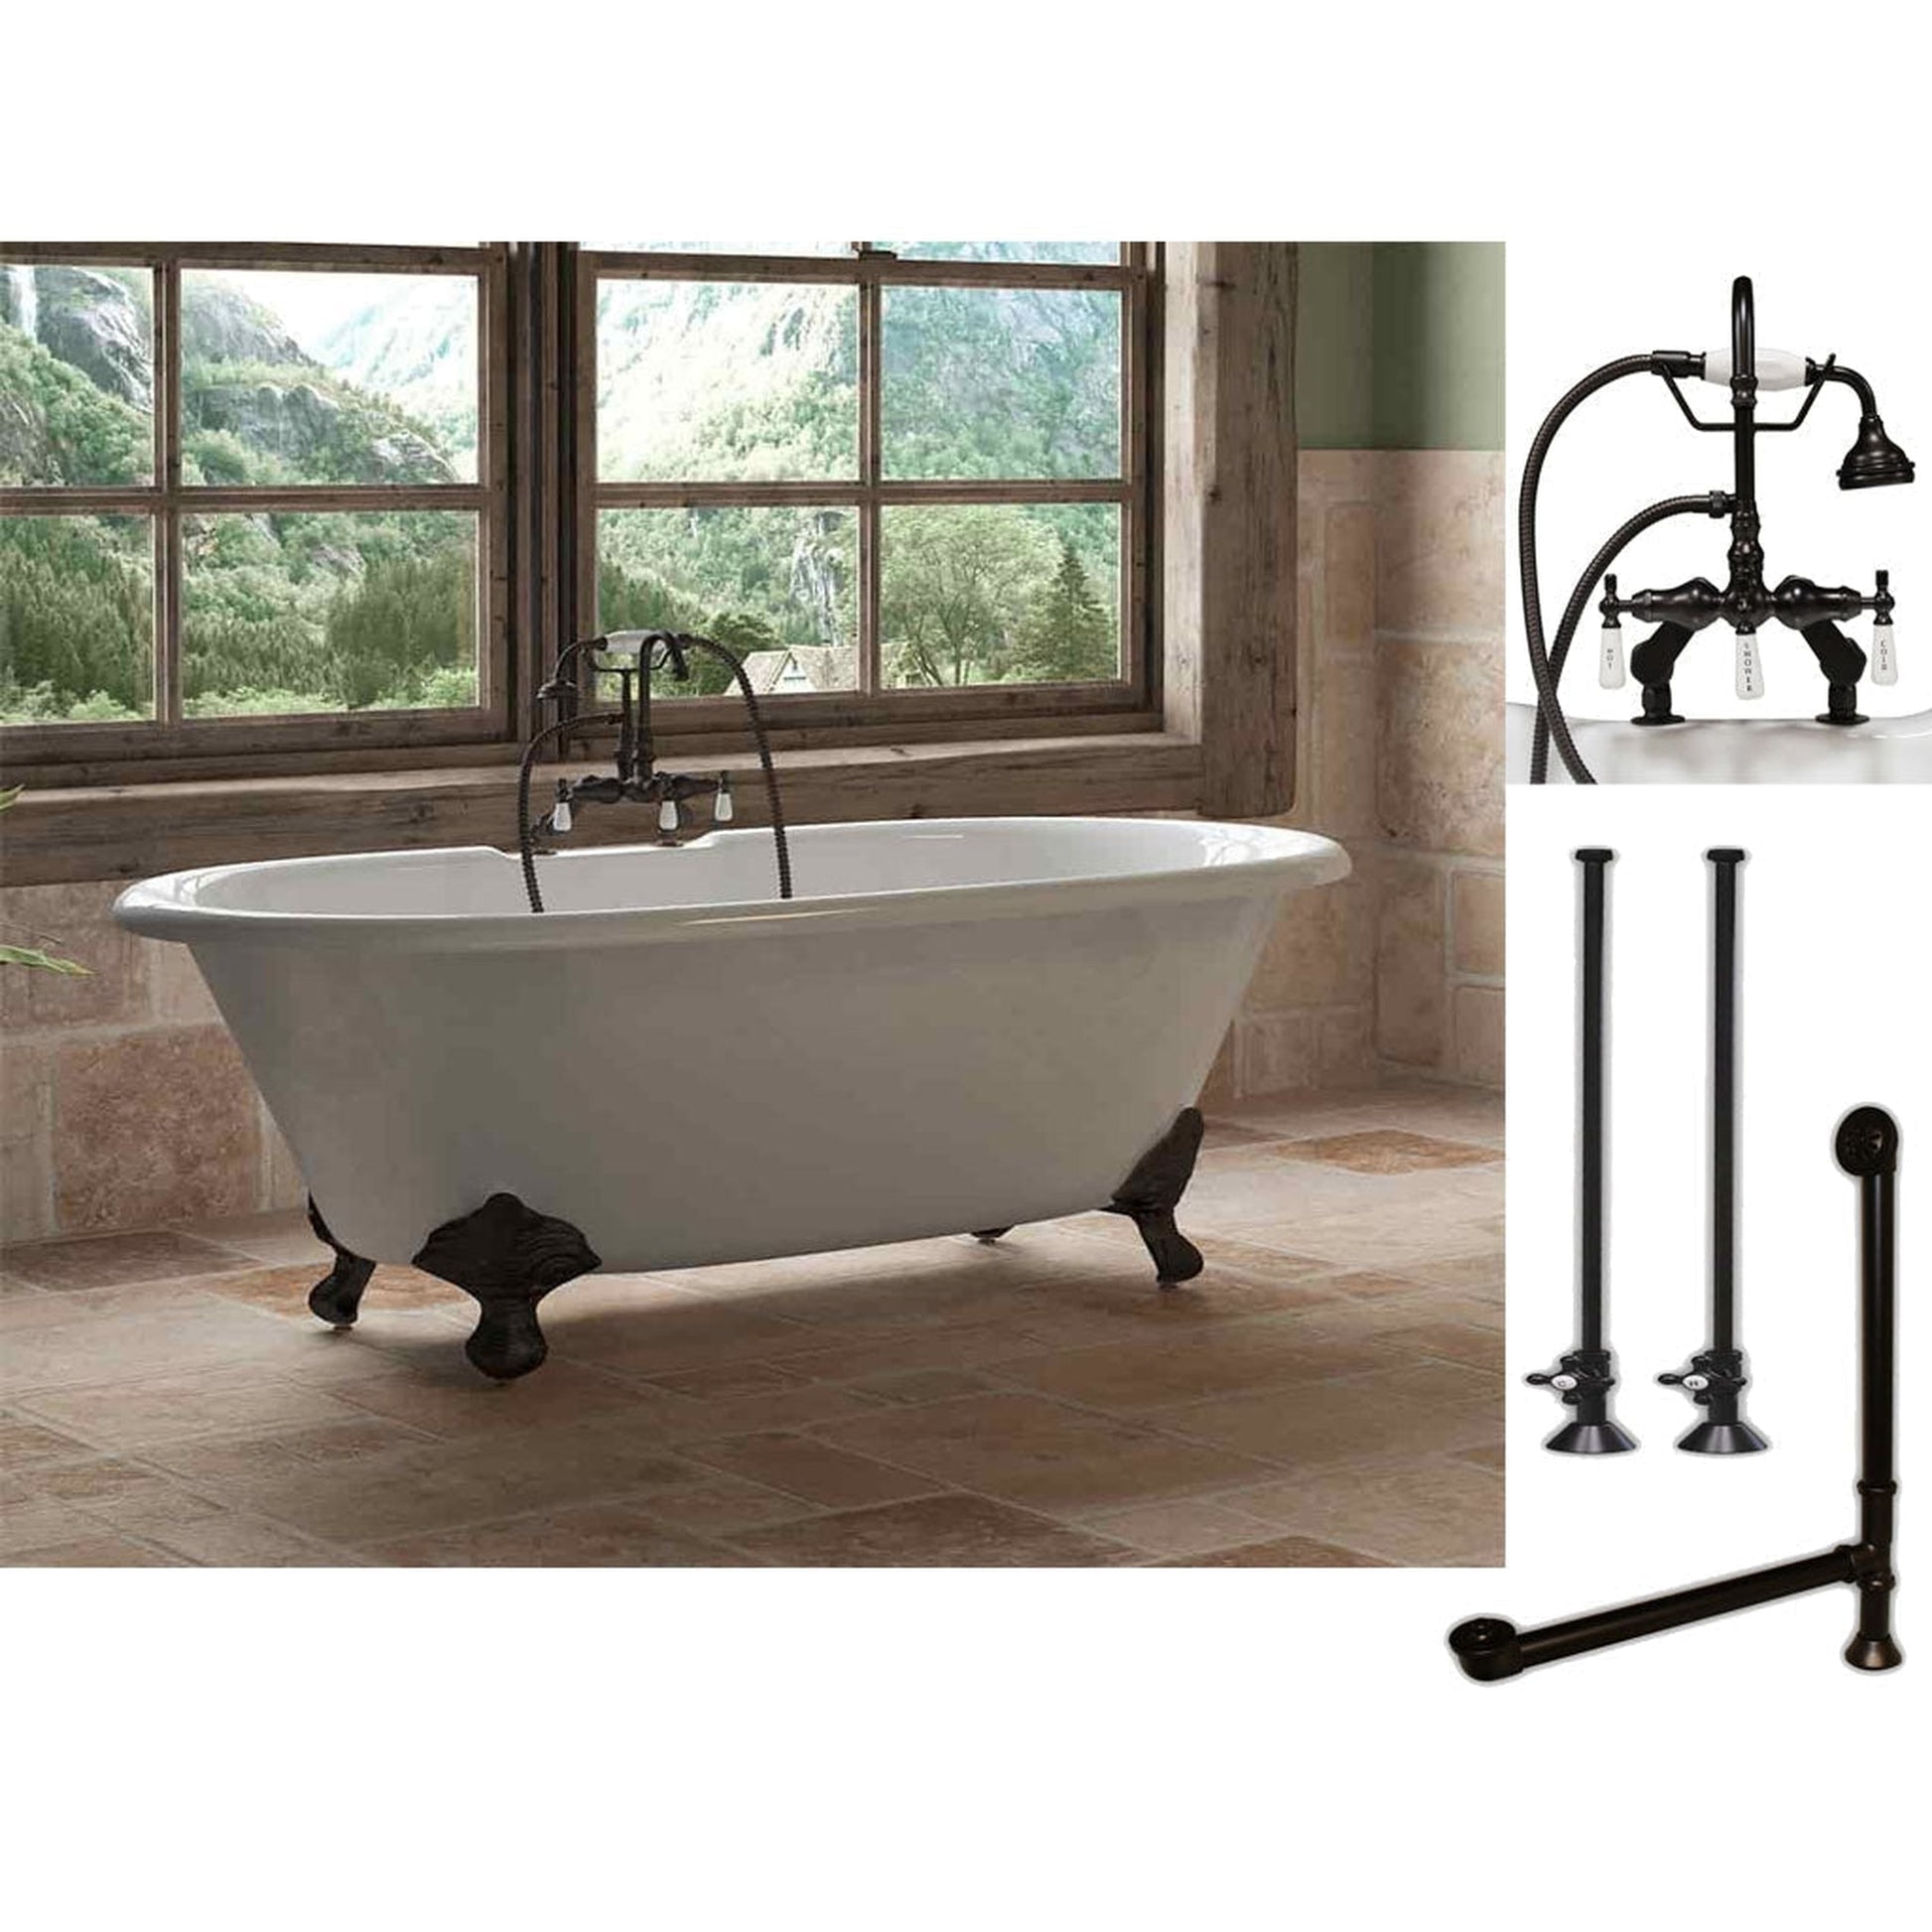 Cambridge Plumbing 60" White Cast Iron Double Ended Clawfoot Bathtub With Deck Holes And Complete Plumbing Package Including Porcelain Lever English Telephone Brass Faucet, Supply Lines, Drain And Overflow Assembly In Oil Rubbed Bronze